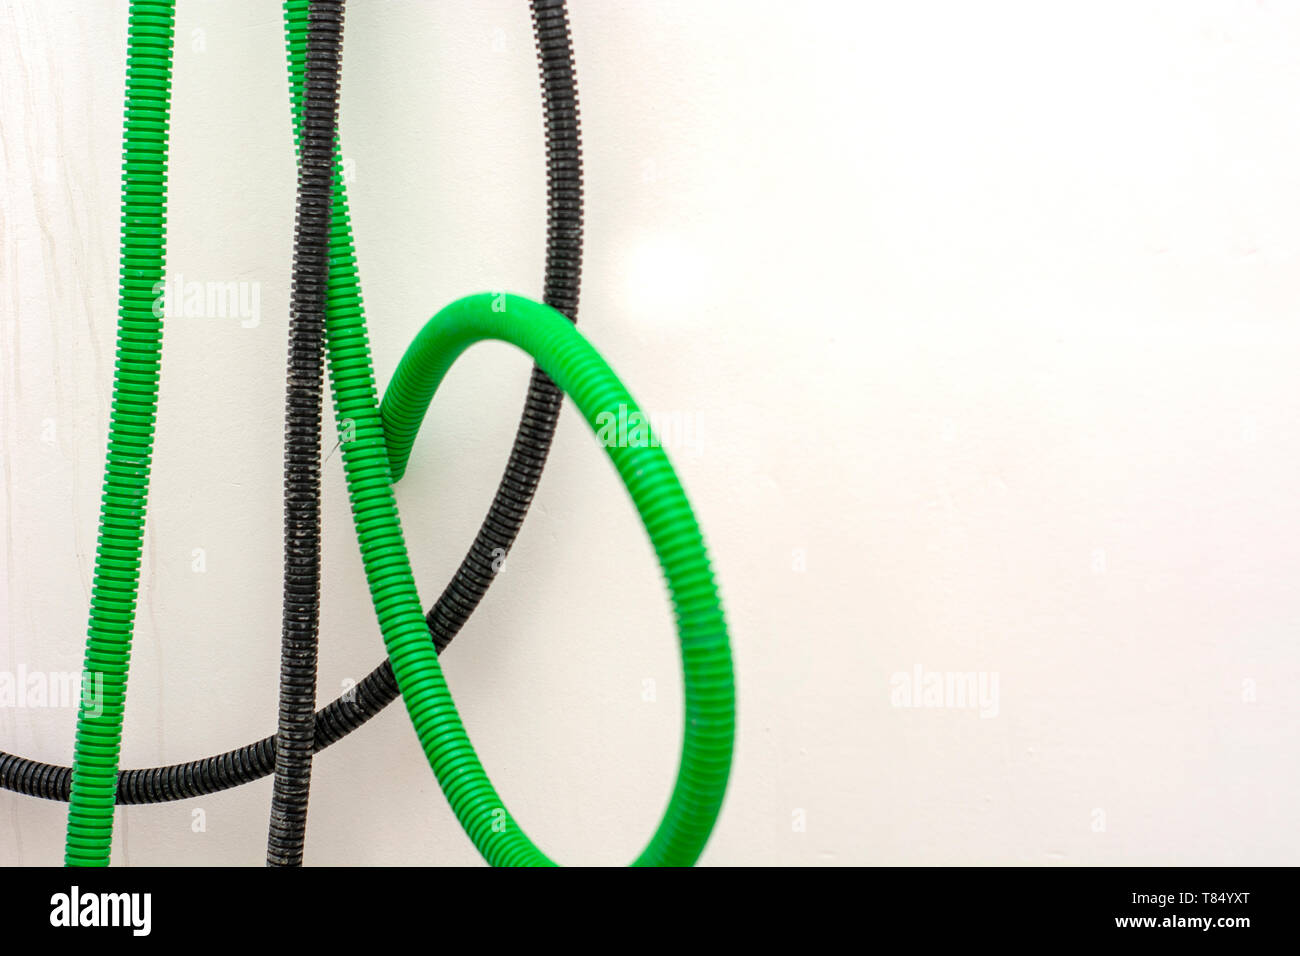 Black and green corrugated bellow conduit tube for electrical wiring Stock Photo